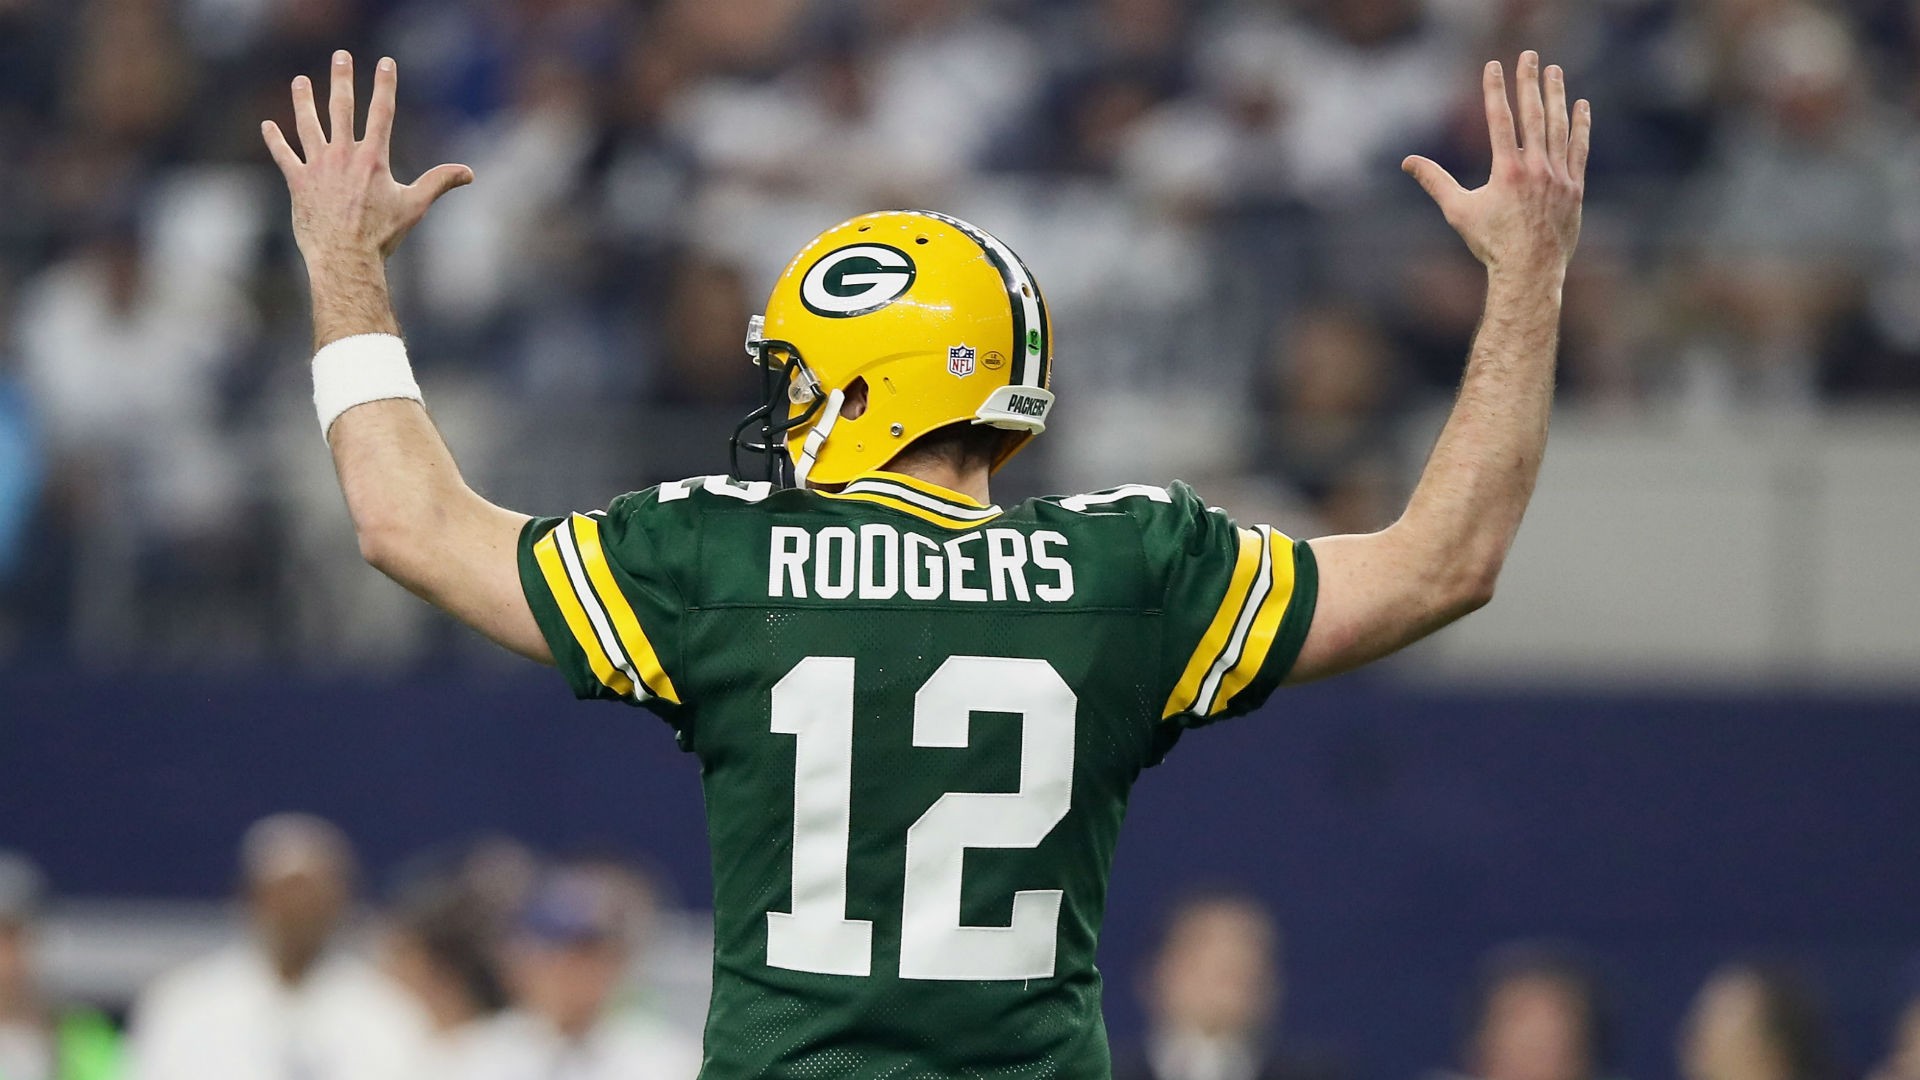 Wallpapers HD Aaron Rodgers With high-resolution 1920X1080 pixel. You can use this wallpaper for your Mac or Windows Desktop Background, iPhone, Android or Tablet and another Smartphone device